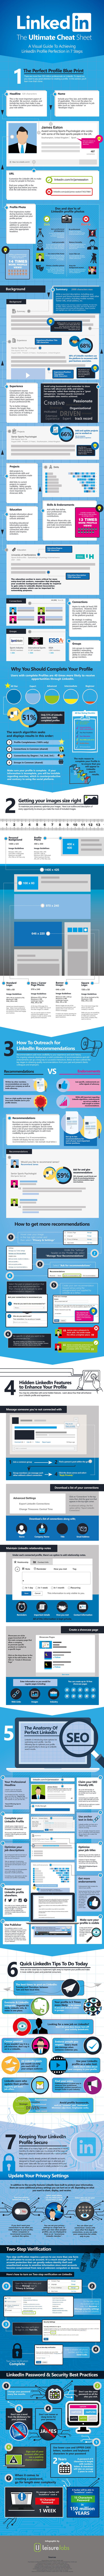 How to use linkedin infographic